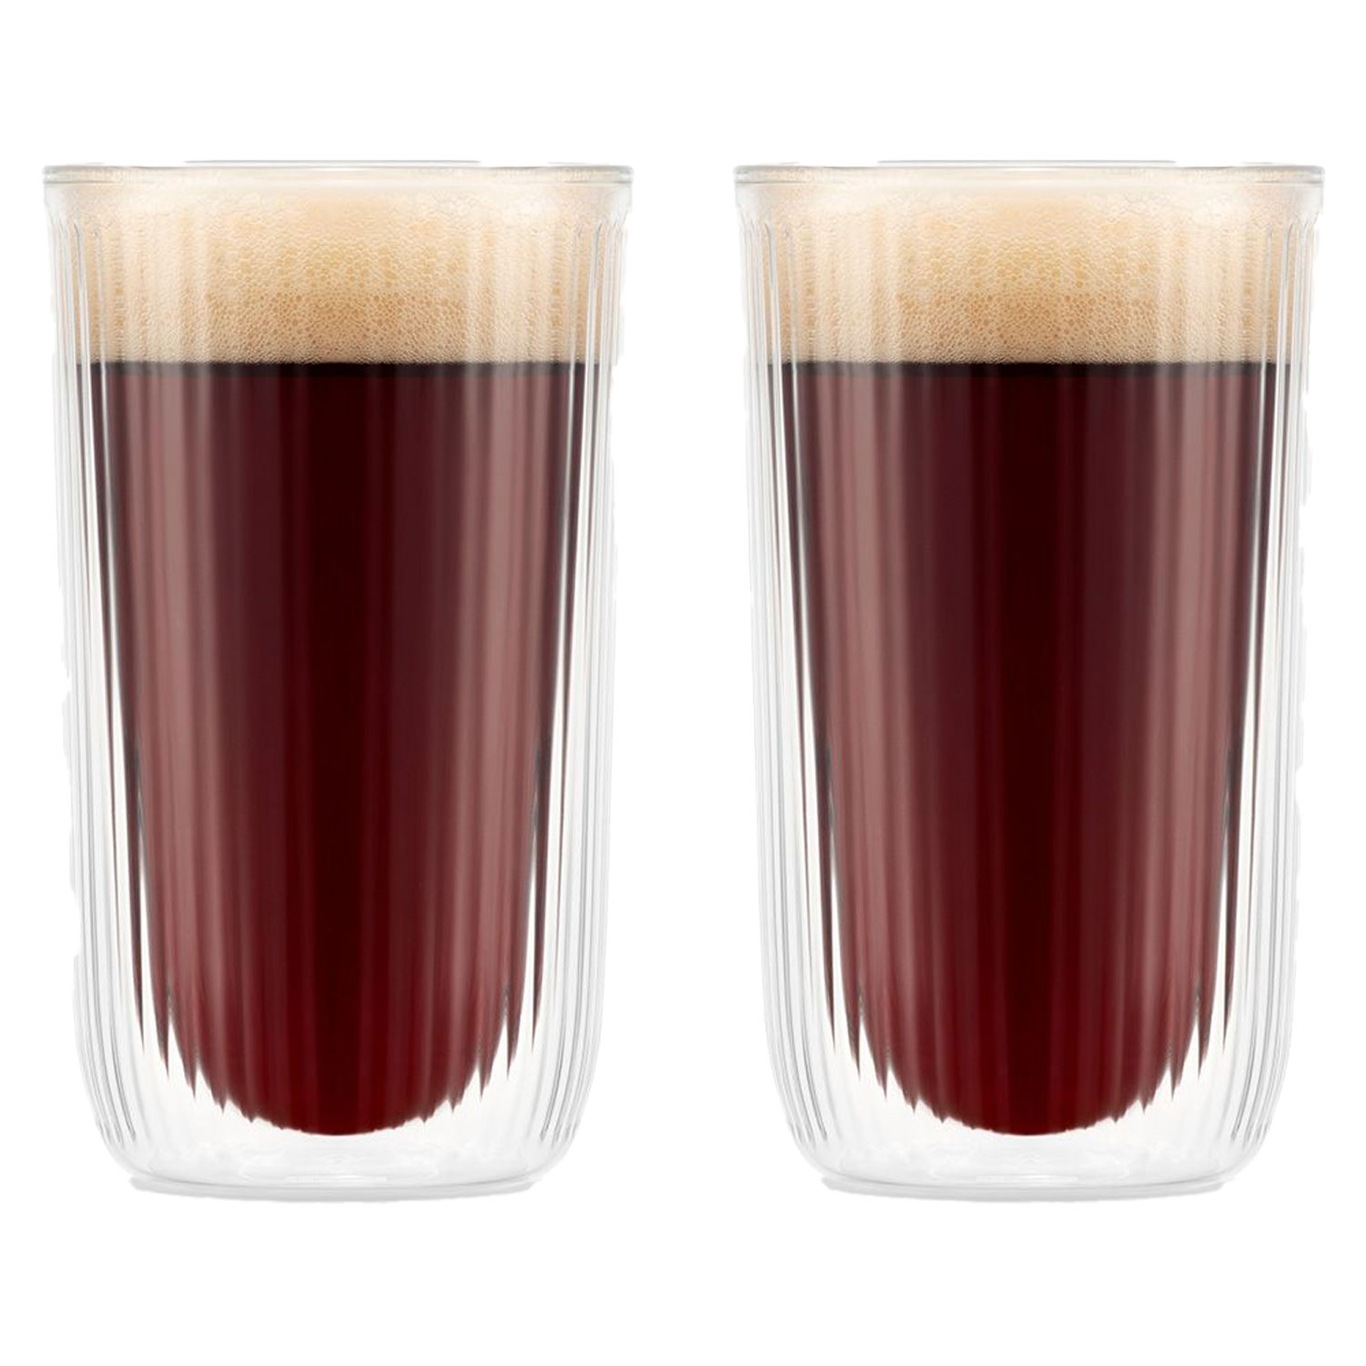 Douro Double Walled Beer Glasses 2-pack, 45 cl